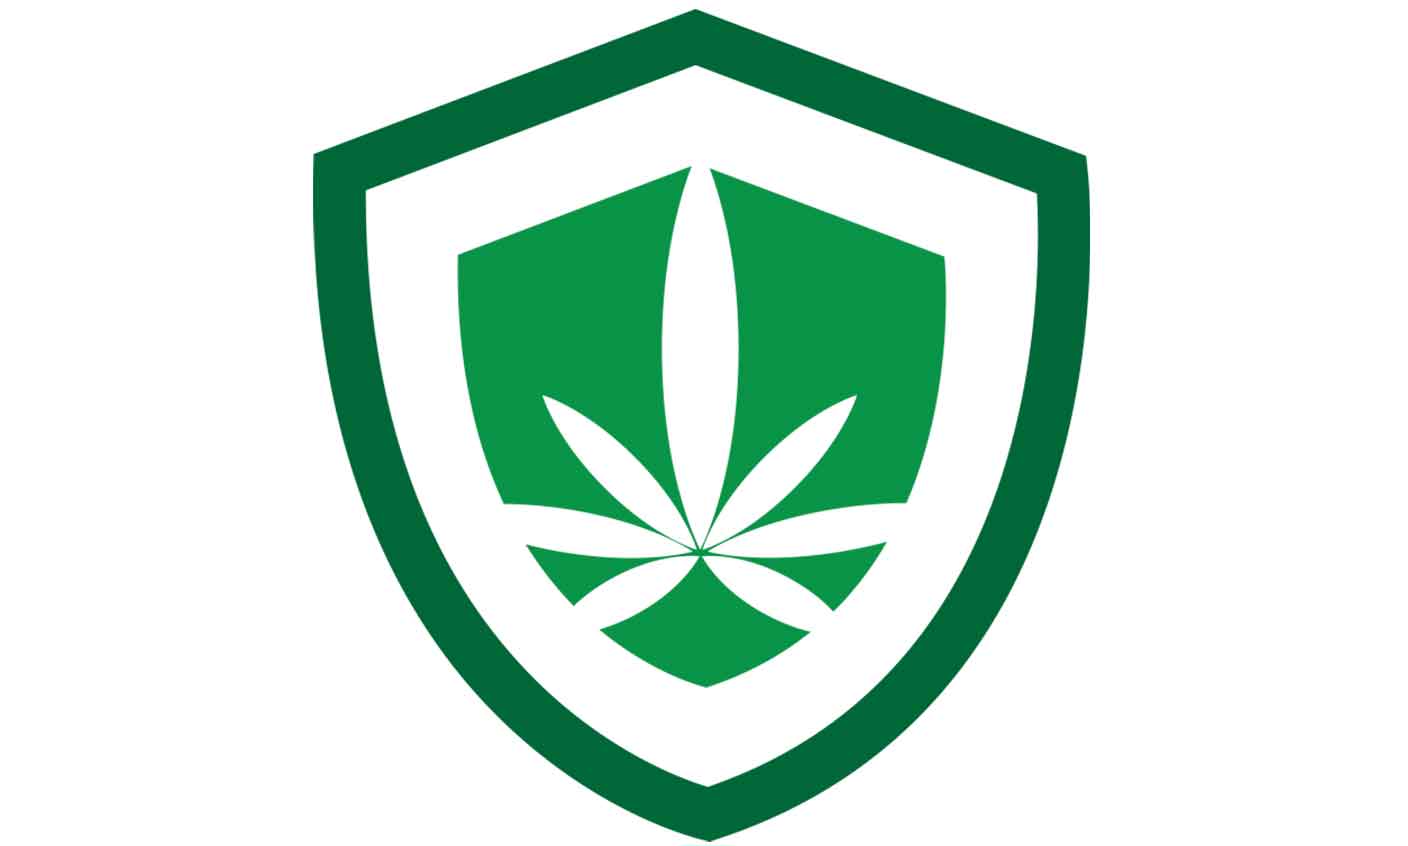 FOR IMMEDIATE RELEASE **GOTHAM CANNABIS SECURITY & COMPLIANCE ANNOUNCES FULL SUITE OF CANNABIS SECURITY SERVICES CATERING TO THE NEW YORK MARKET**